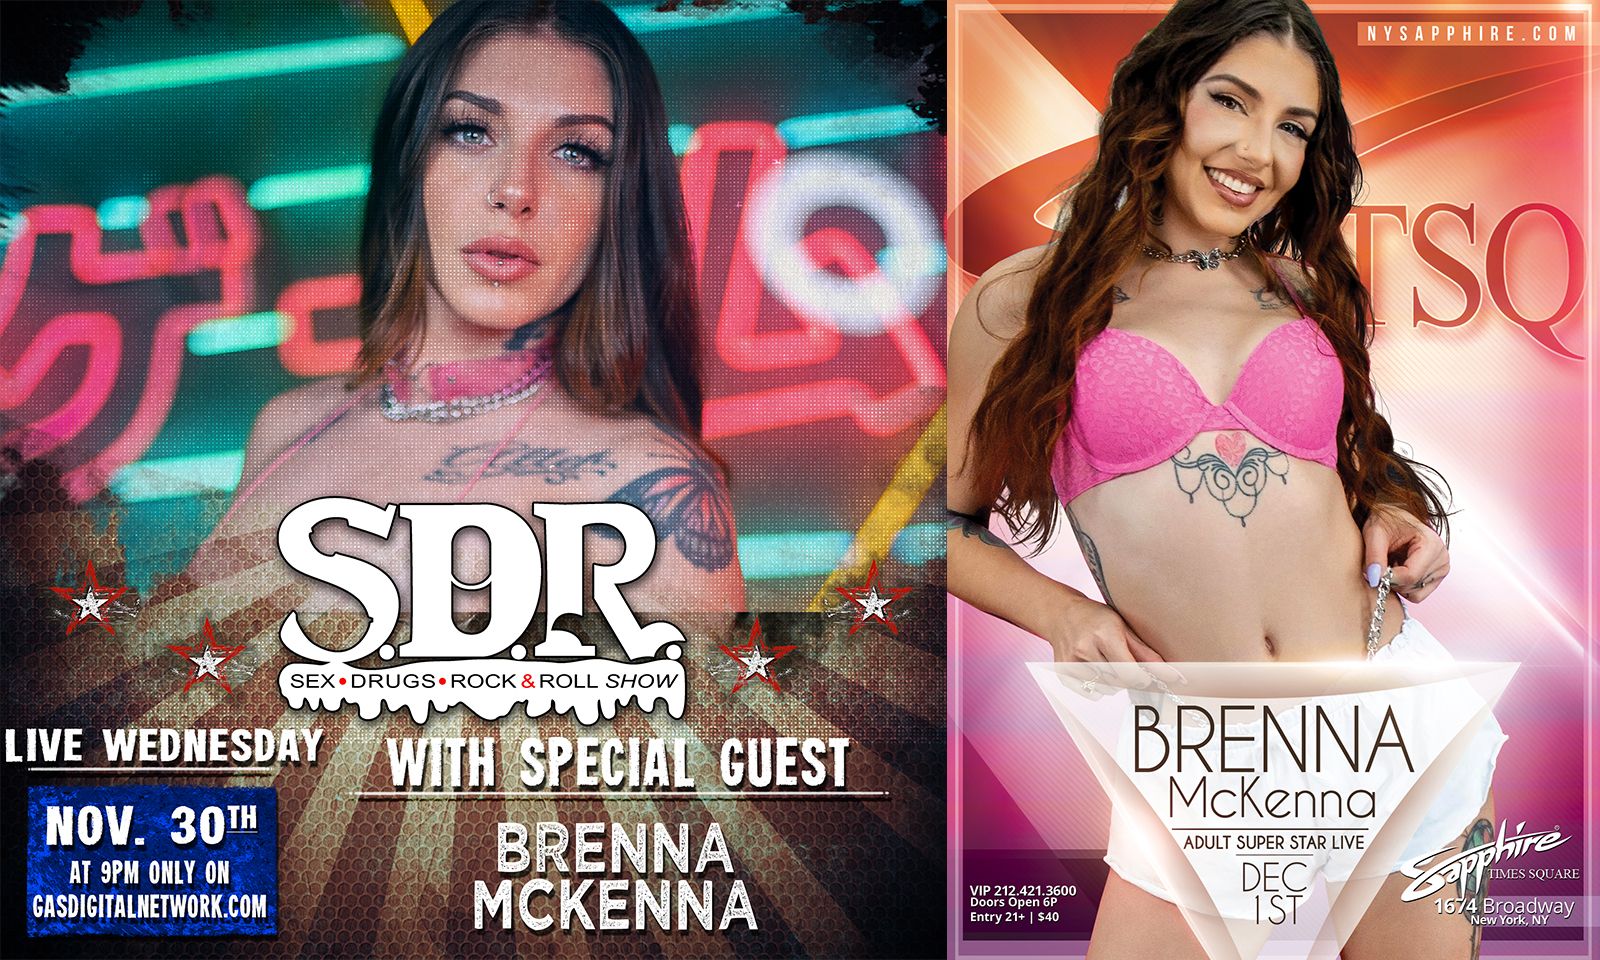 Brenna McKenna Coming to 'SDR Show,' Sapphire Times Square